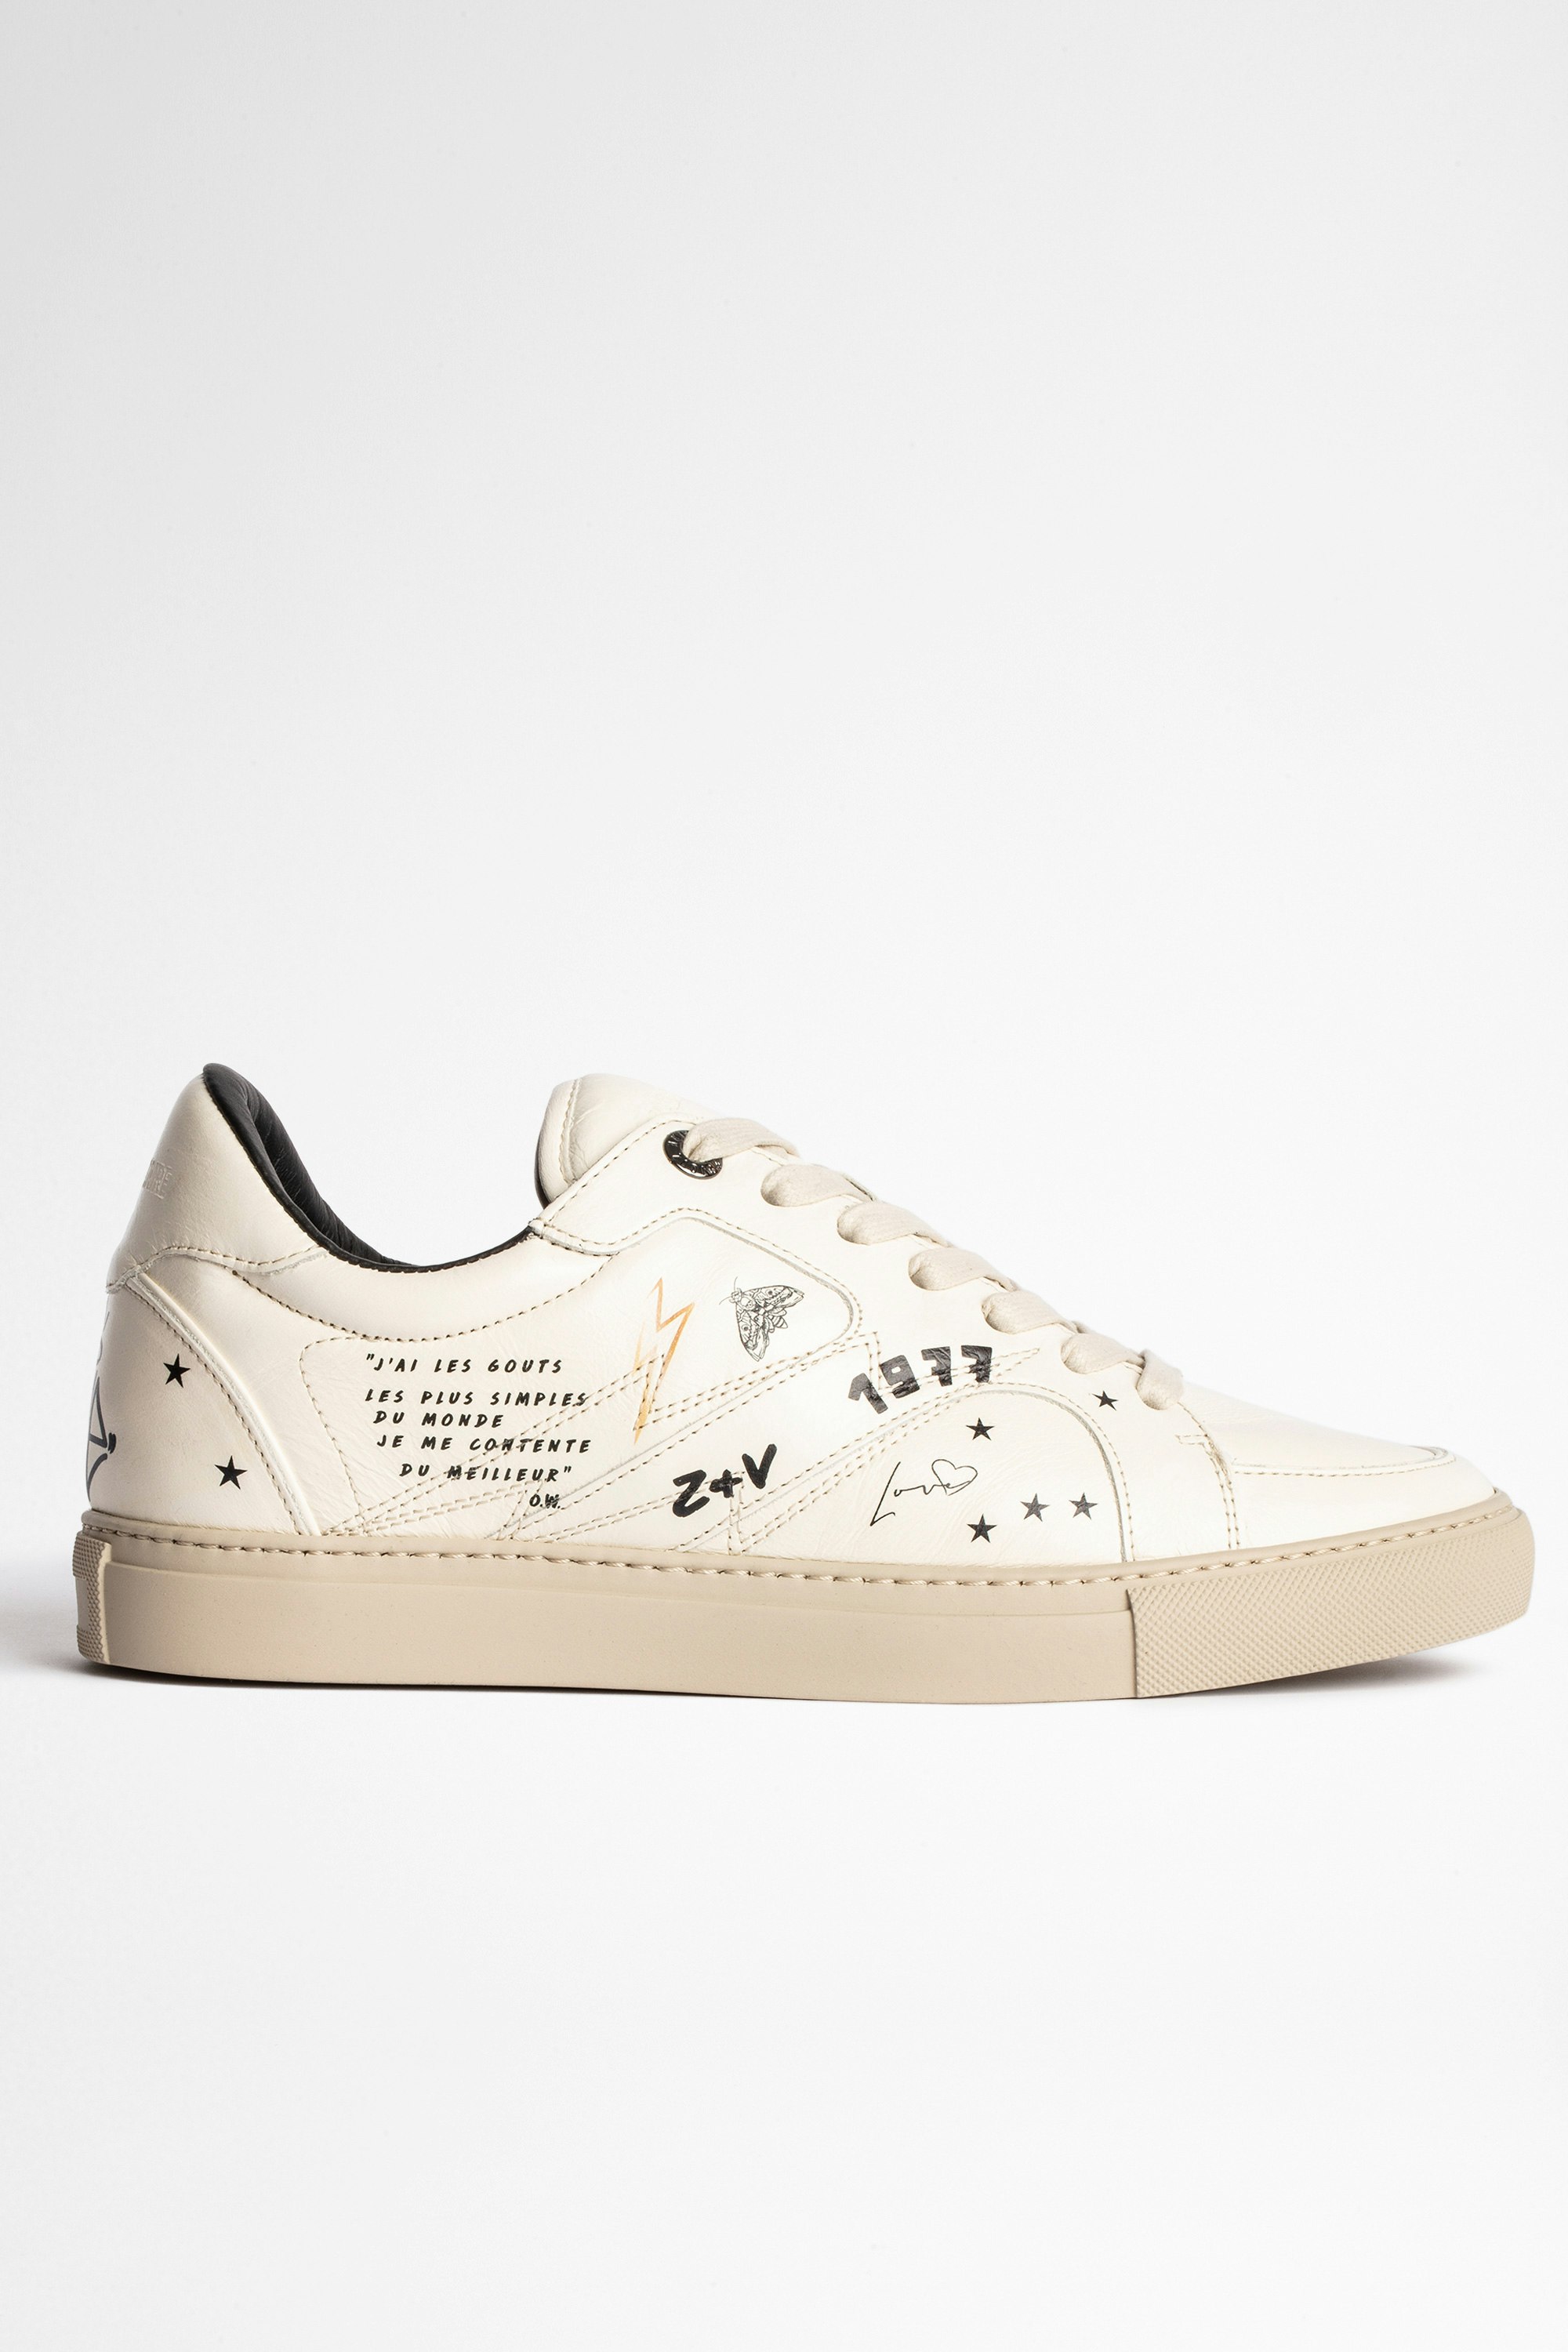 ZV1747 Board Crush レザースニーカー Women’s white leather sneakers with symbol decoration